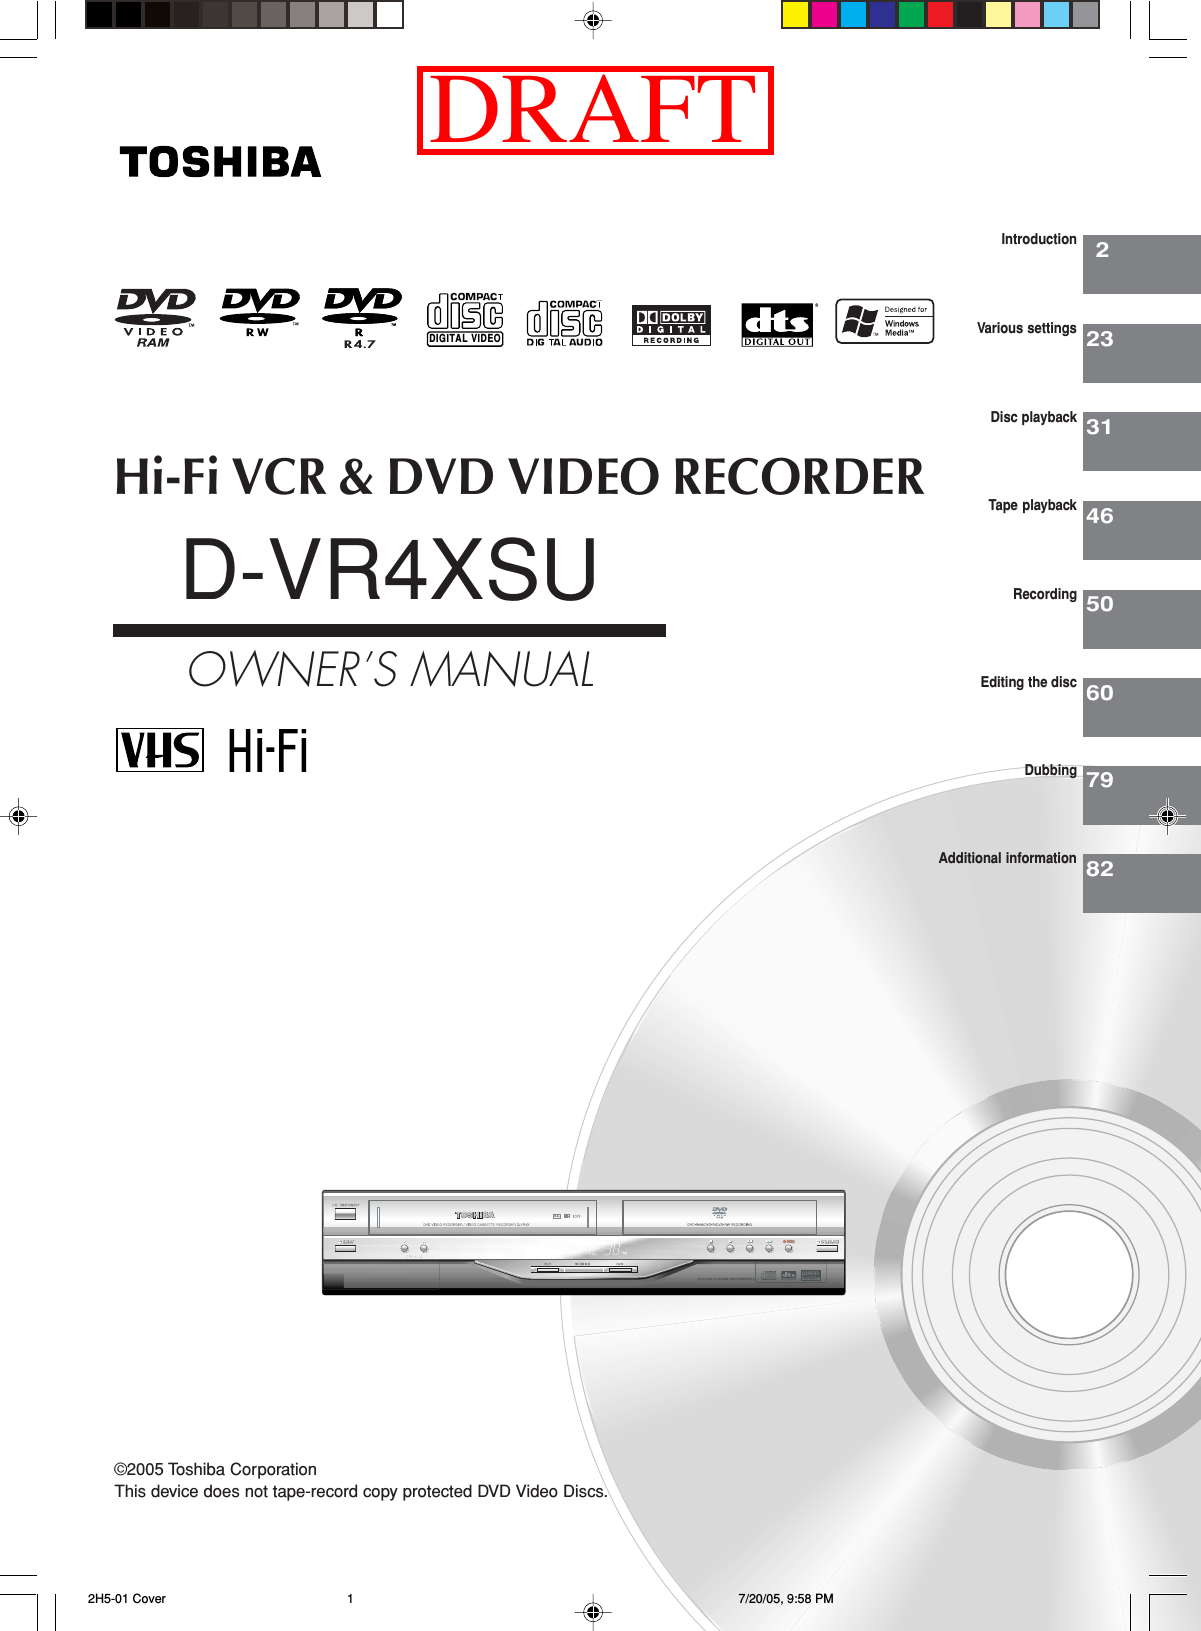 Hi-Fi VCR &amp; DVD VIDEO RECORDERD-VR4XSUOWNER’S MANUAL22331465060IntroductionVarious settingsDisc playbackTape playbackRecordingEditing the discDIGITAL VIDEO©2005 Toshiba Corporation7982DubbingAdditional informationThis device does not tape-record copy protected DVD Video Discs. 2H5-01 Cover 7/20/05, 9:58 PM1DRAFT